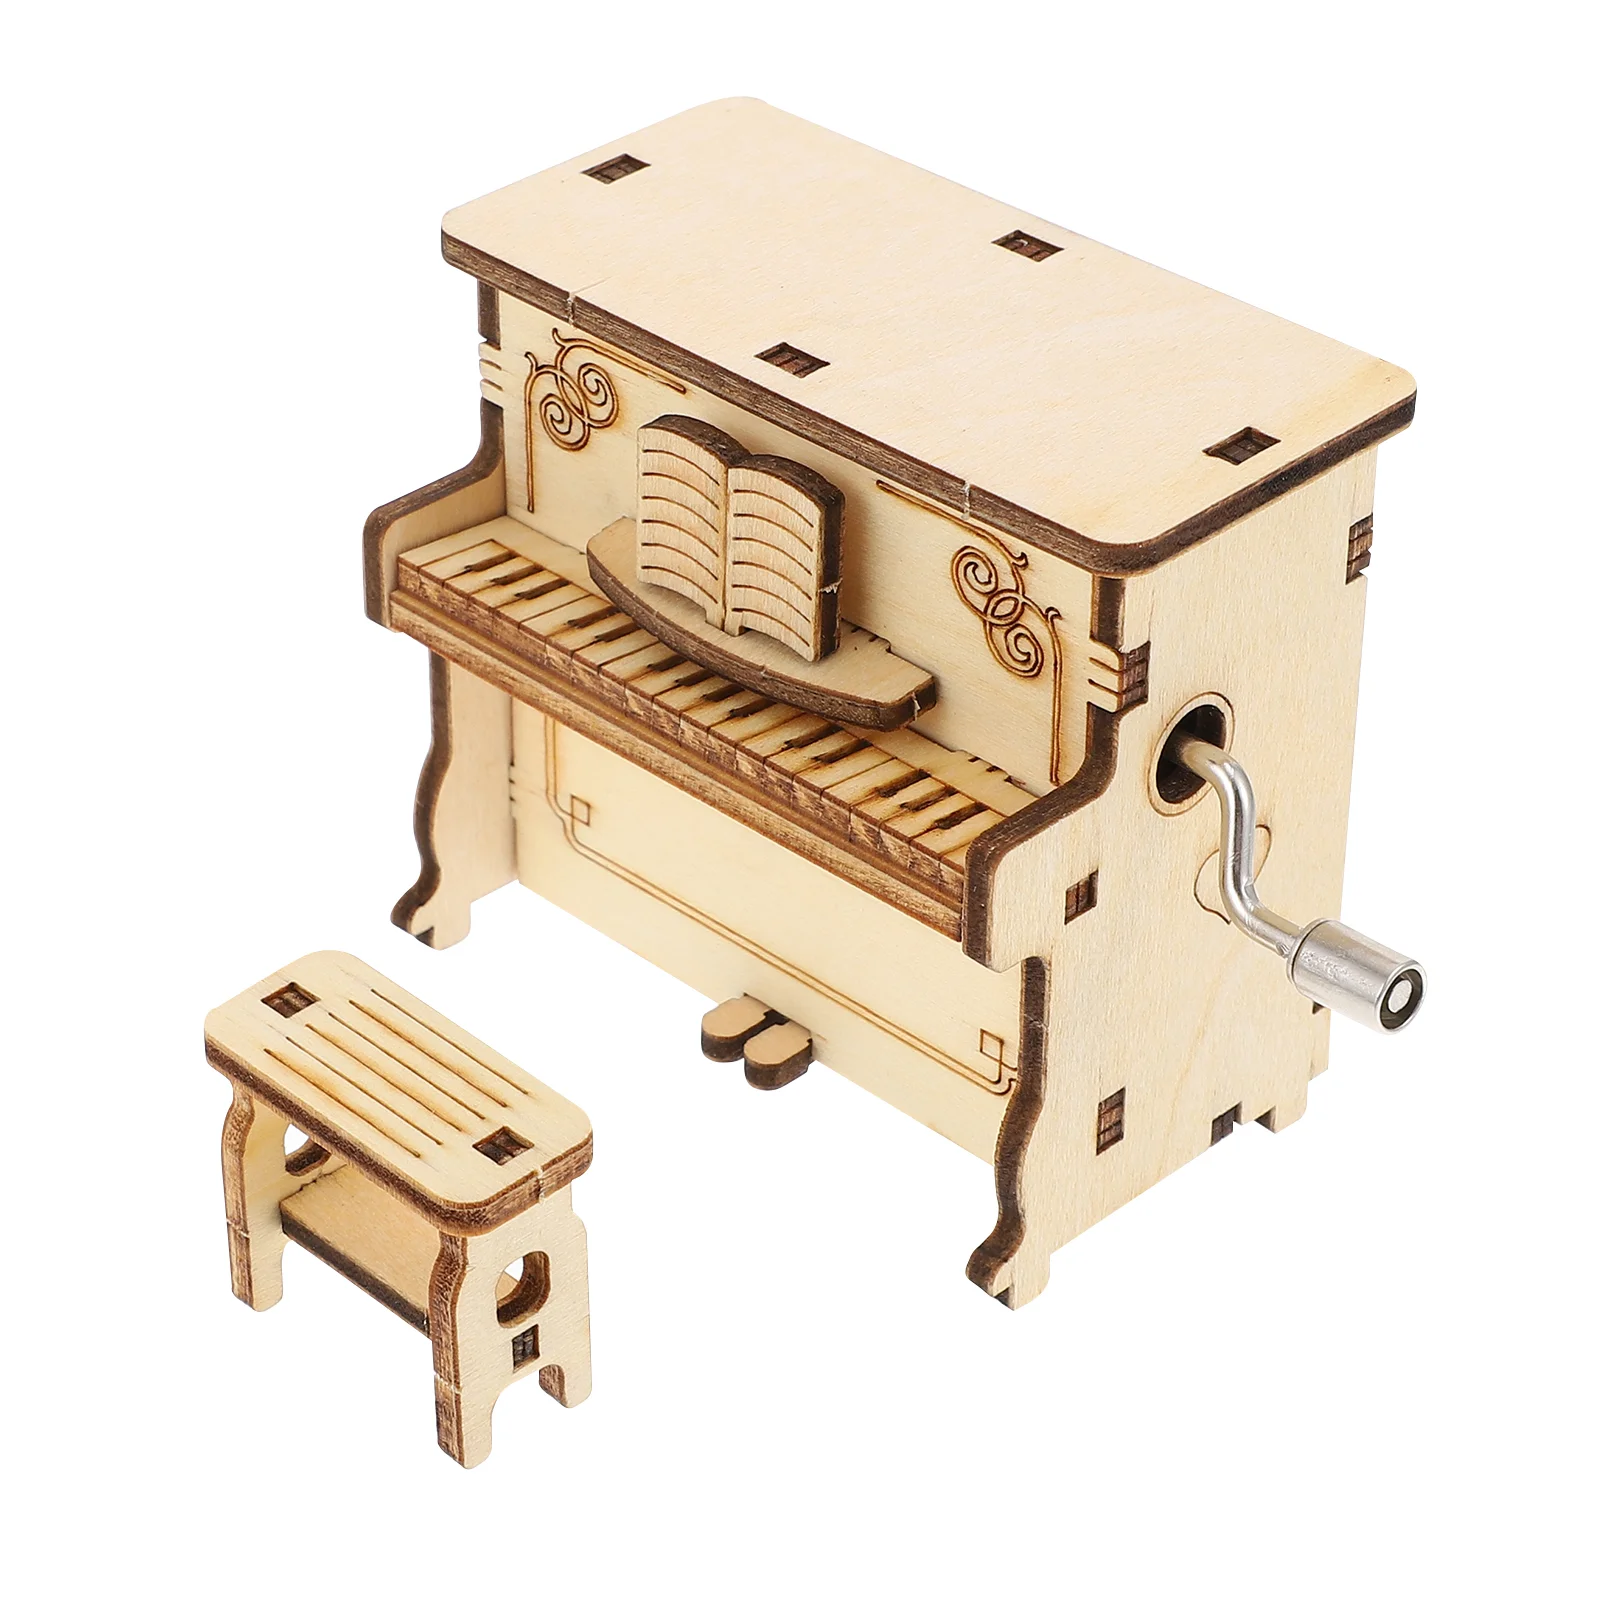 devops jigsaw puzzle jigsaw custom wooden jigsaws for adults custom child diorama accessories puzzle Model Piano Music Box Child Wooden Puzzle Adults Mechanical Puzzles Educational Plaything